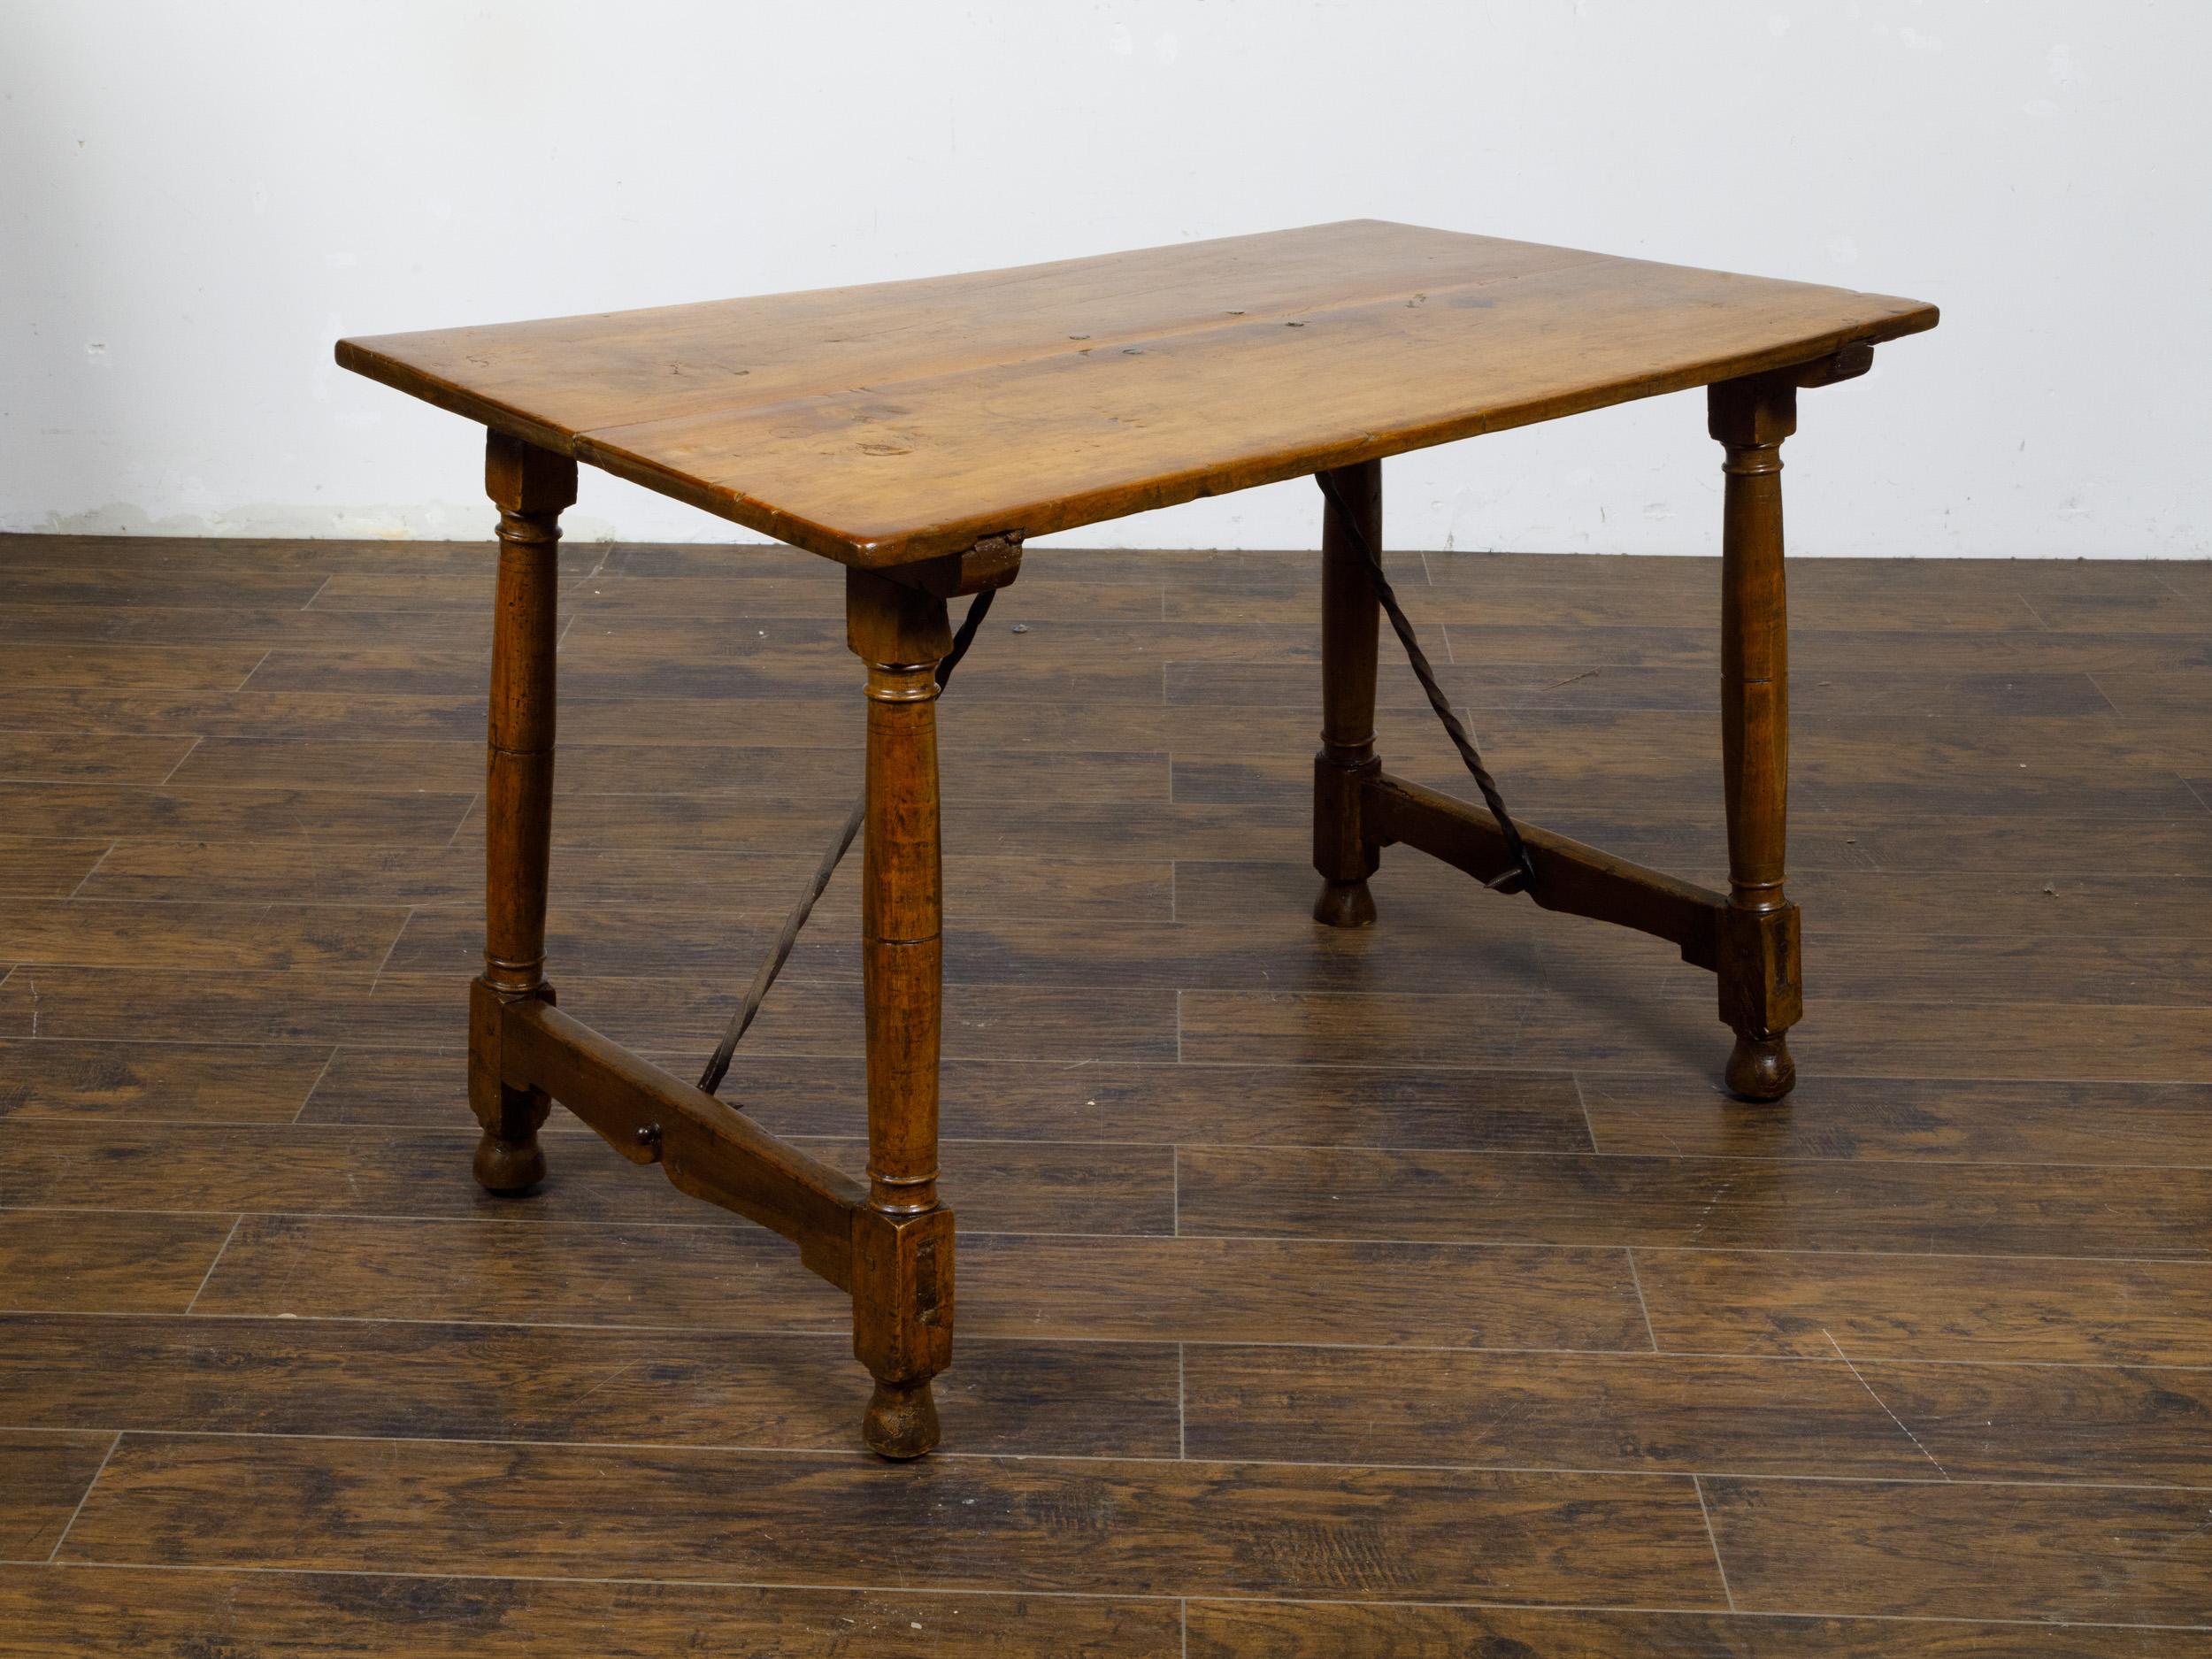 An Italian walnut console table from the 19th century with column shaped legs and iron stretchers. This Italian walnut console table from the 19th century stands as a testament to the timeless appeal of rustic elegance. With its slender, slightly